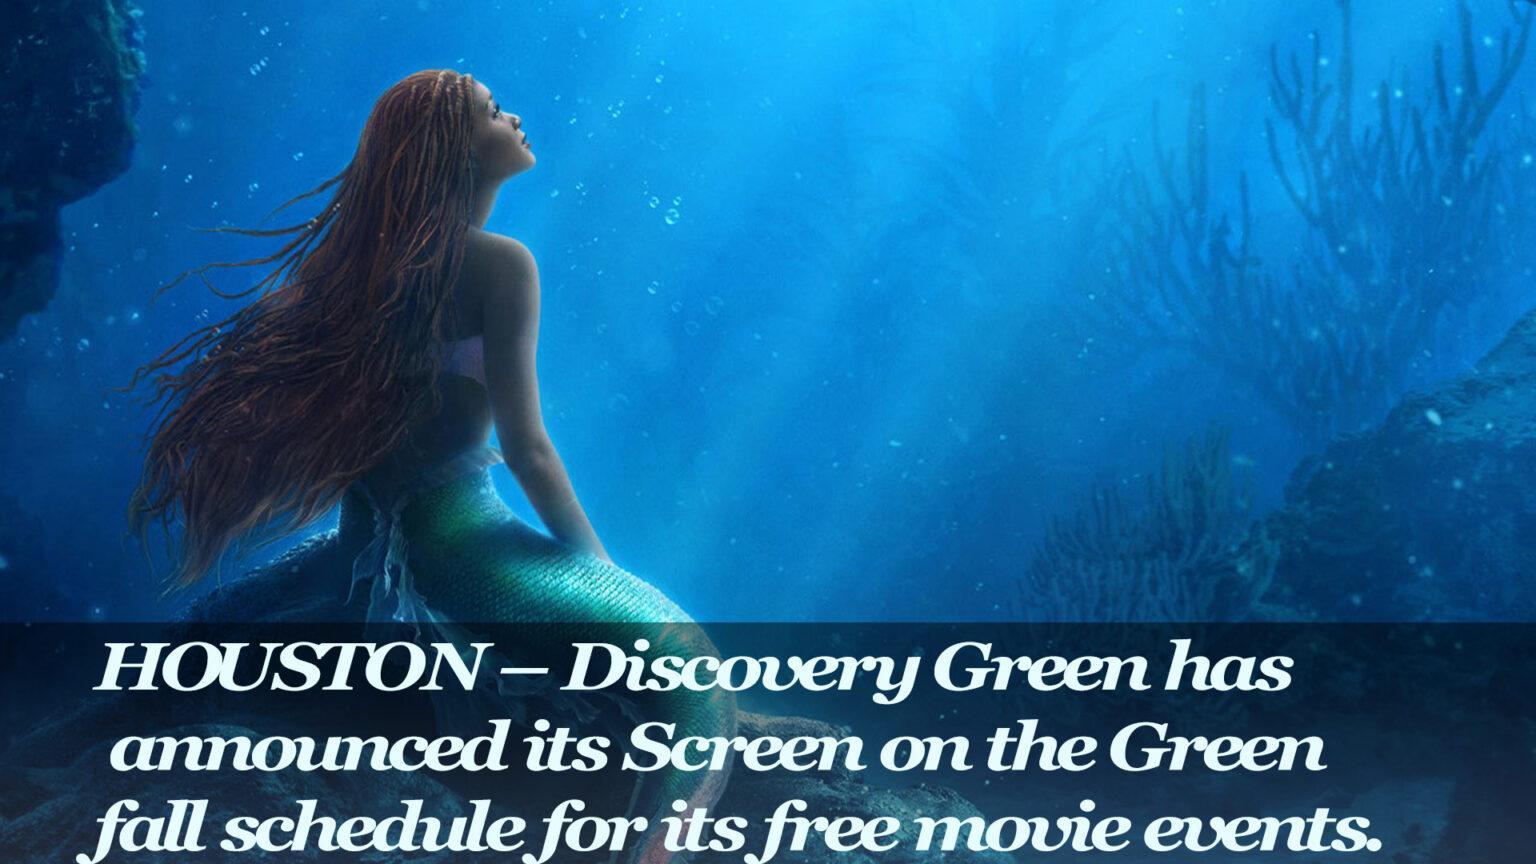 Get Ready to Dive into the Magic: Free Screenings of 'The Little Mermaid,' 'Super Mario Bros. Movie,' and 'Cinderella' in Houston – Dress Up and Join the Fun